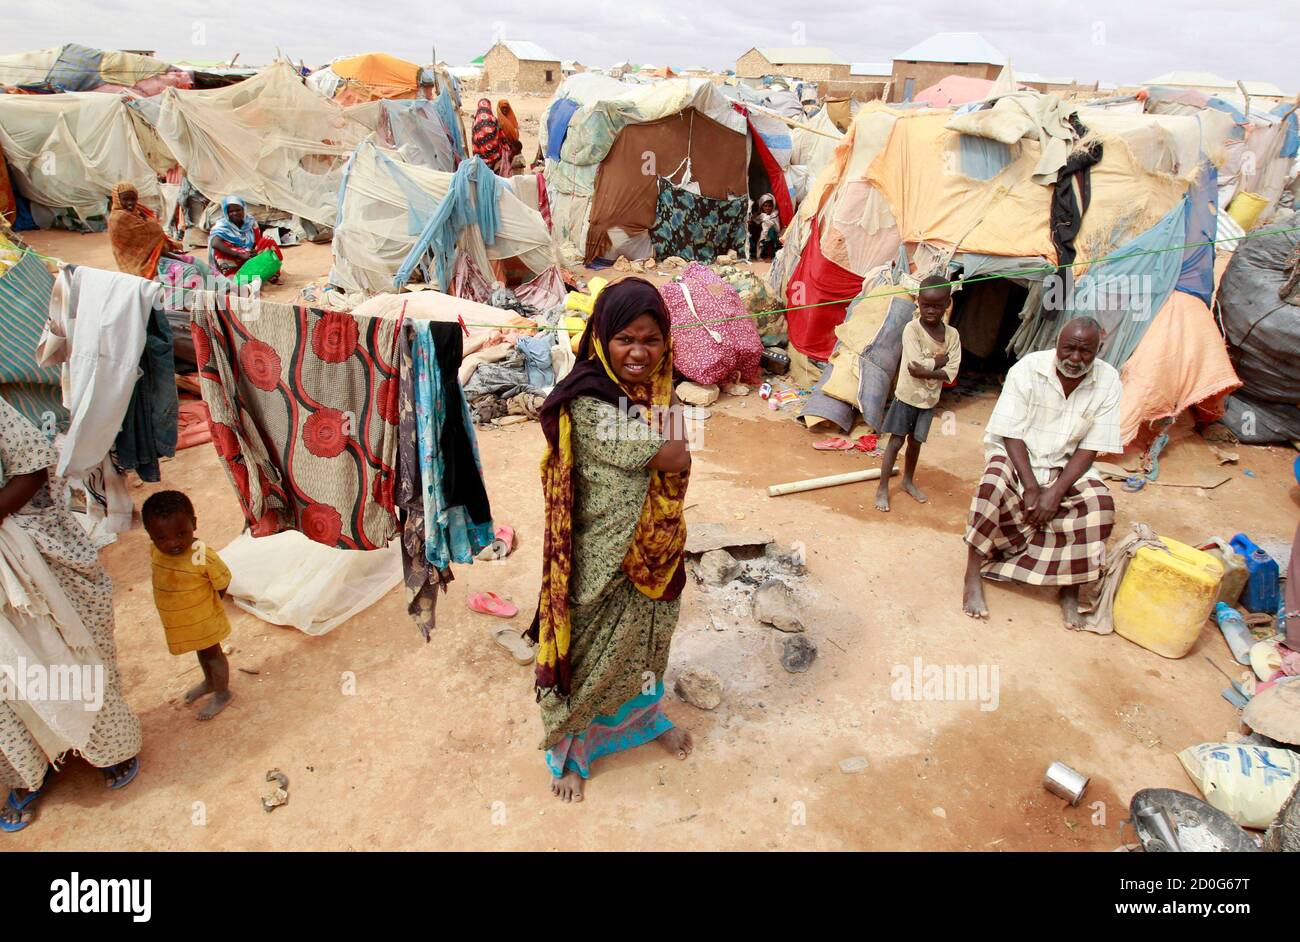 An internally displaced Somali family are seen outside their makeshift shelter at the Hiran IDP settlement in Galkayo, northwest of Somalia's capital Mogadishu, July 18, 2011. Galkayo hosts over 60,000 internally displaced Somalis in 21 settlements and there are always new arrivals due to the prolonged drought. The U.N. has described the drought as an emergency, one level short of a famine. Some 10 million people are affected in the region, dubbed the 'triangle of death' by local media, that straddles Kenya, Somalia and Ethiopia.  REUTERS/Thomas Mukoya (SOMALIA - Tags: SOCIETY CIVIL UNREST ENV Stock Photo